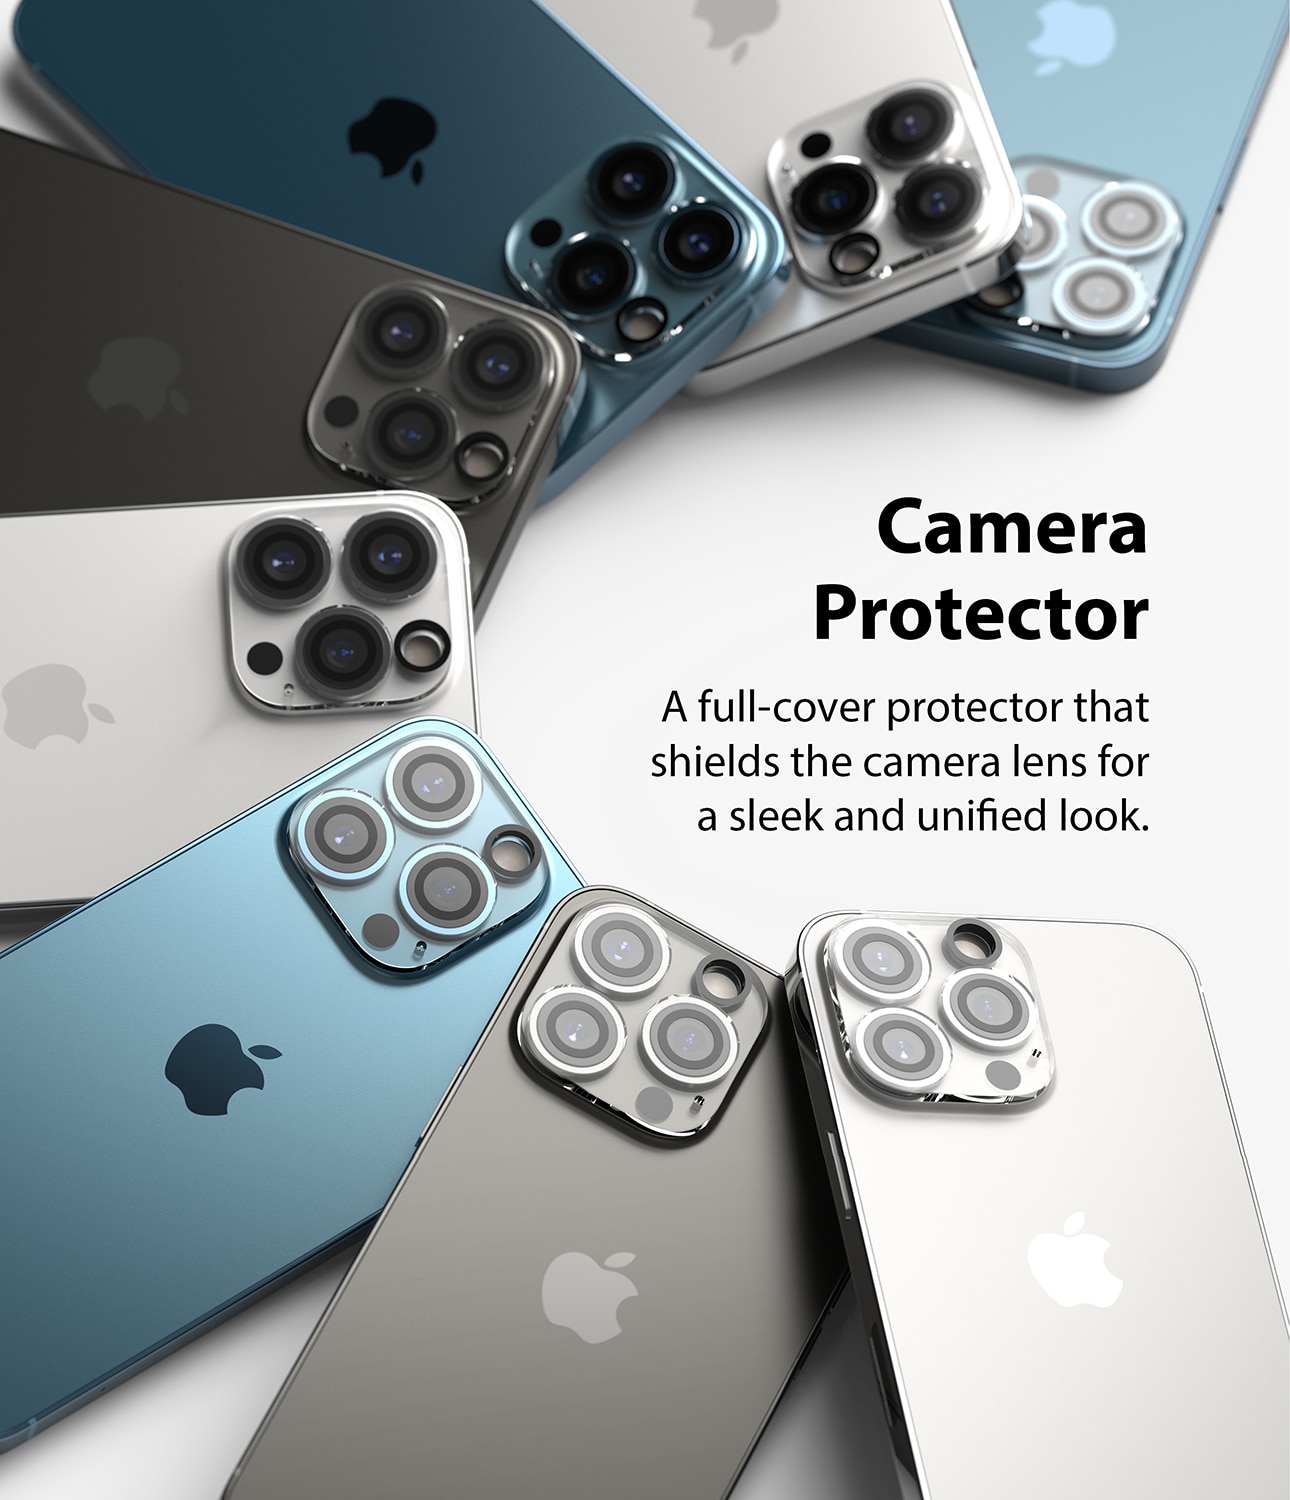 Camera Protector Glass iPhone 13 Pro/13 Pro Max (2-pack)